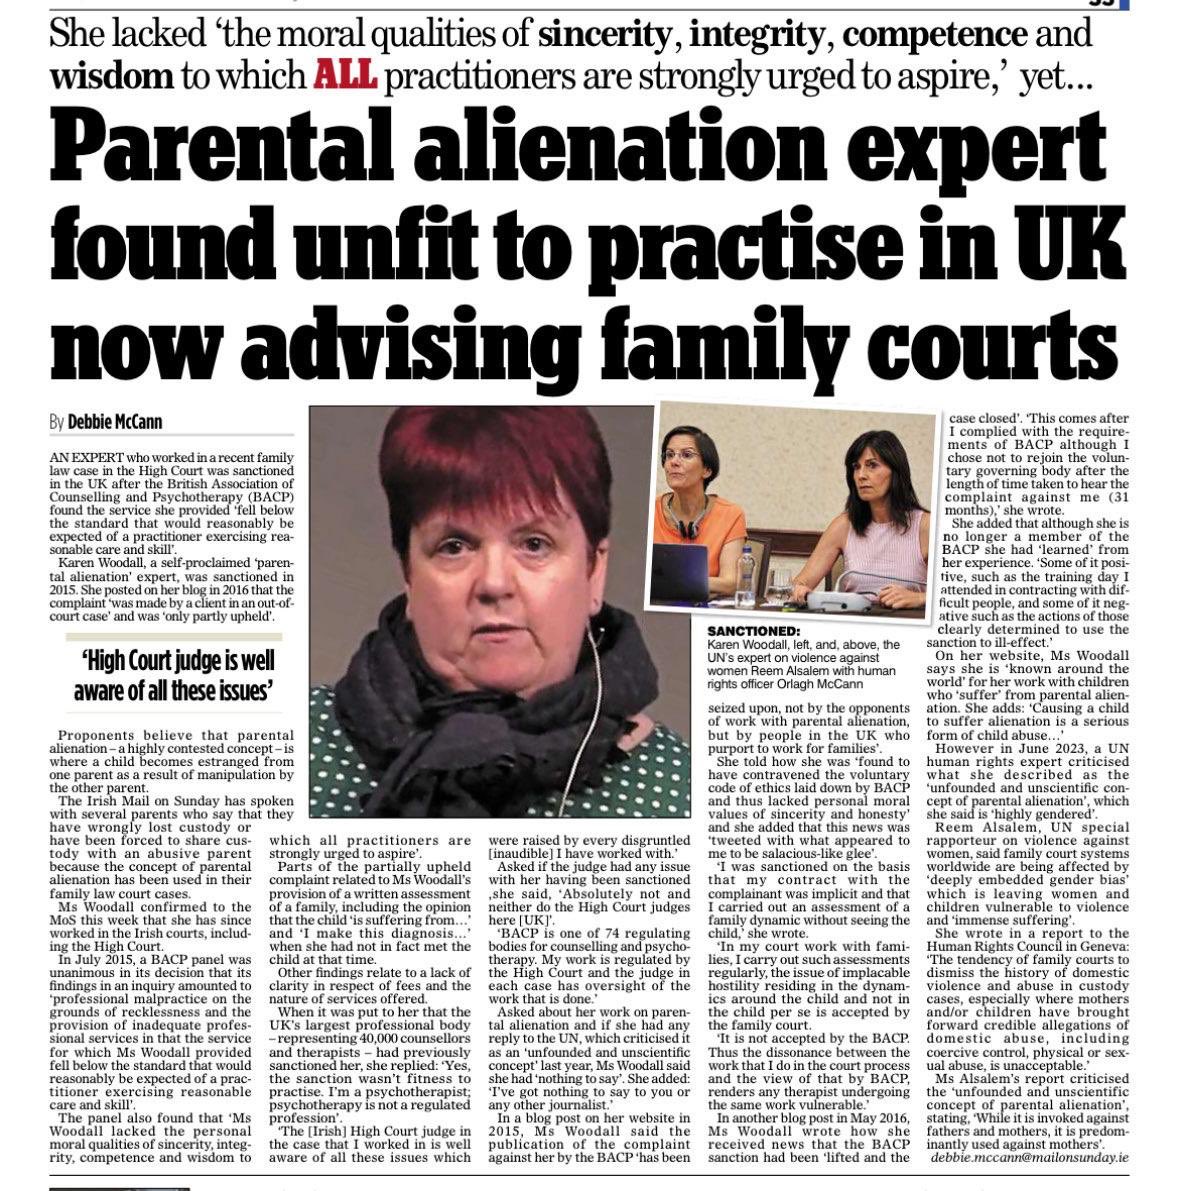 #FamilyCourt #ZeroTolerance Karen Woodall failed psychotherapist. Does she work in Irish Family Courts under close supervision from High Court Judge? Any of your members/clients paying her? @tusla @lawyers_ireland @DeptJusticeIRL @caidreamh @SLACork @IASW_IRL @CourtsServiceIE